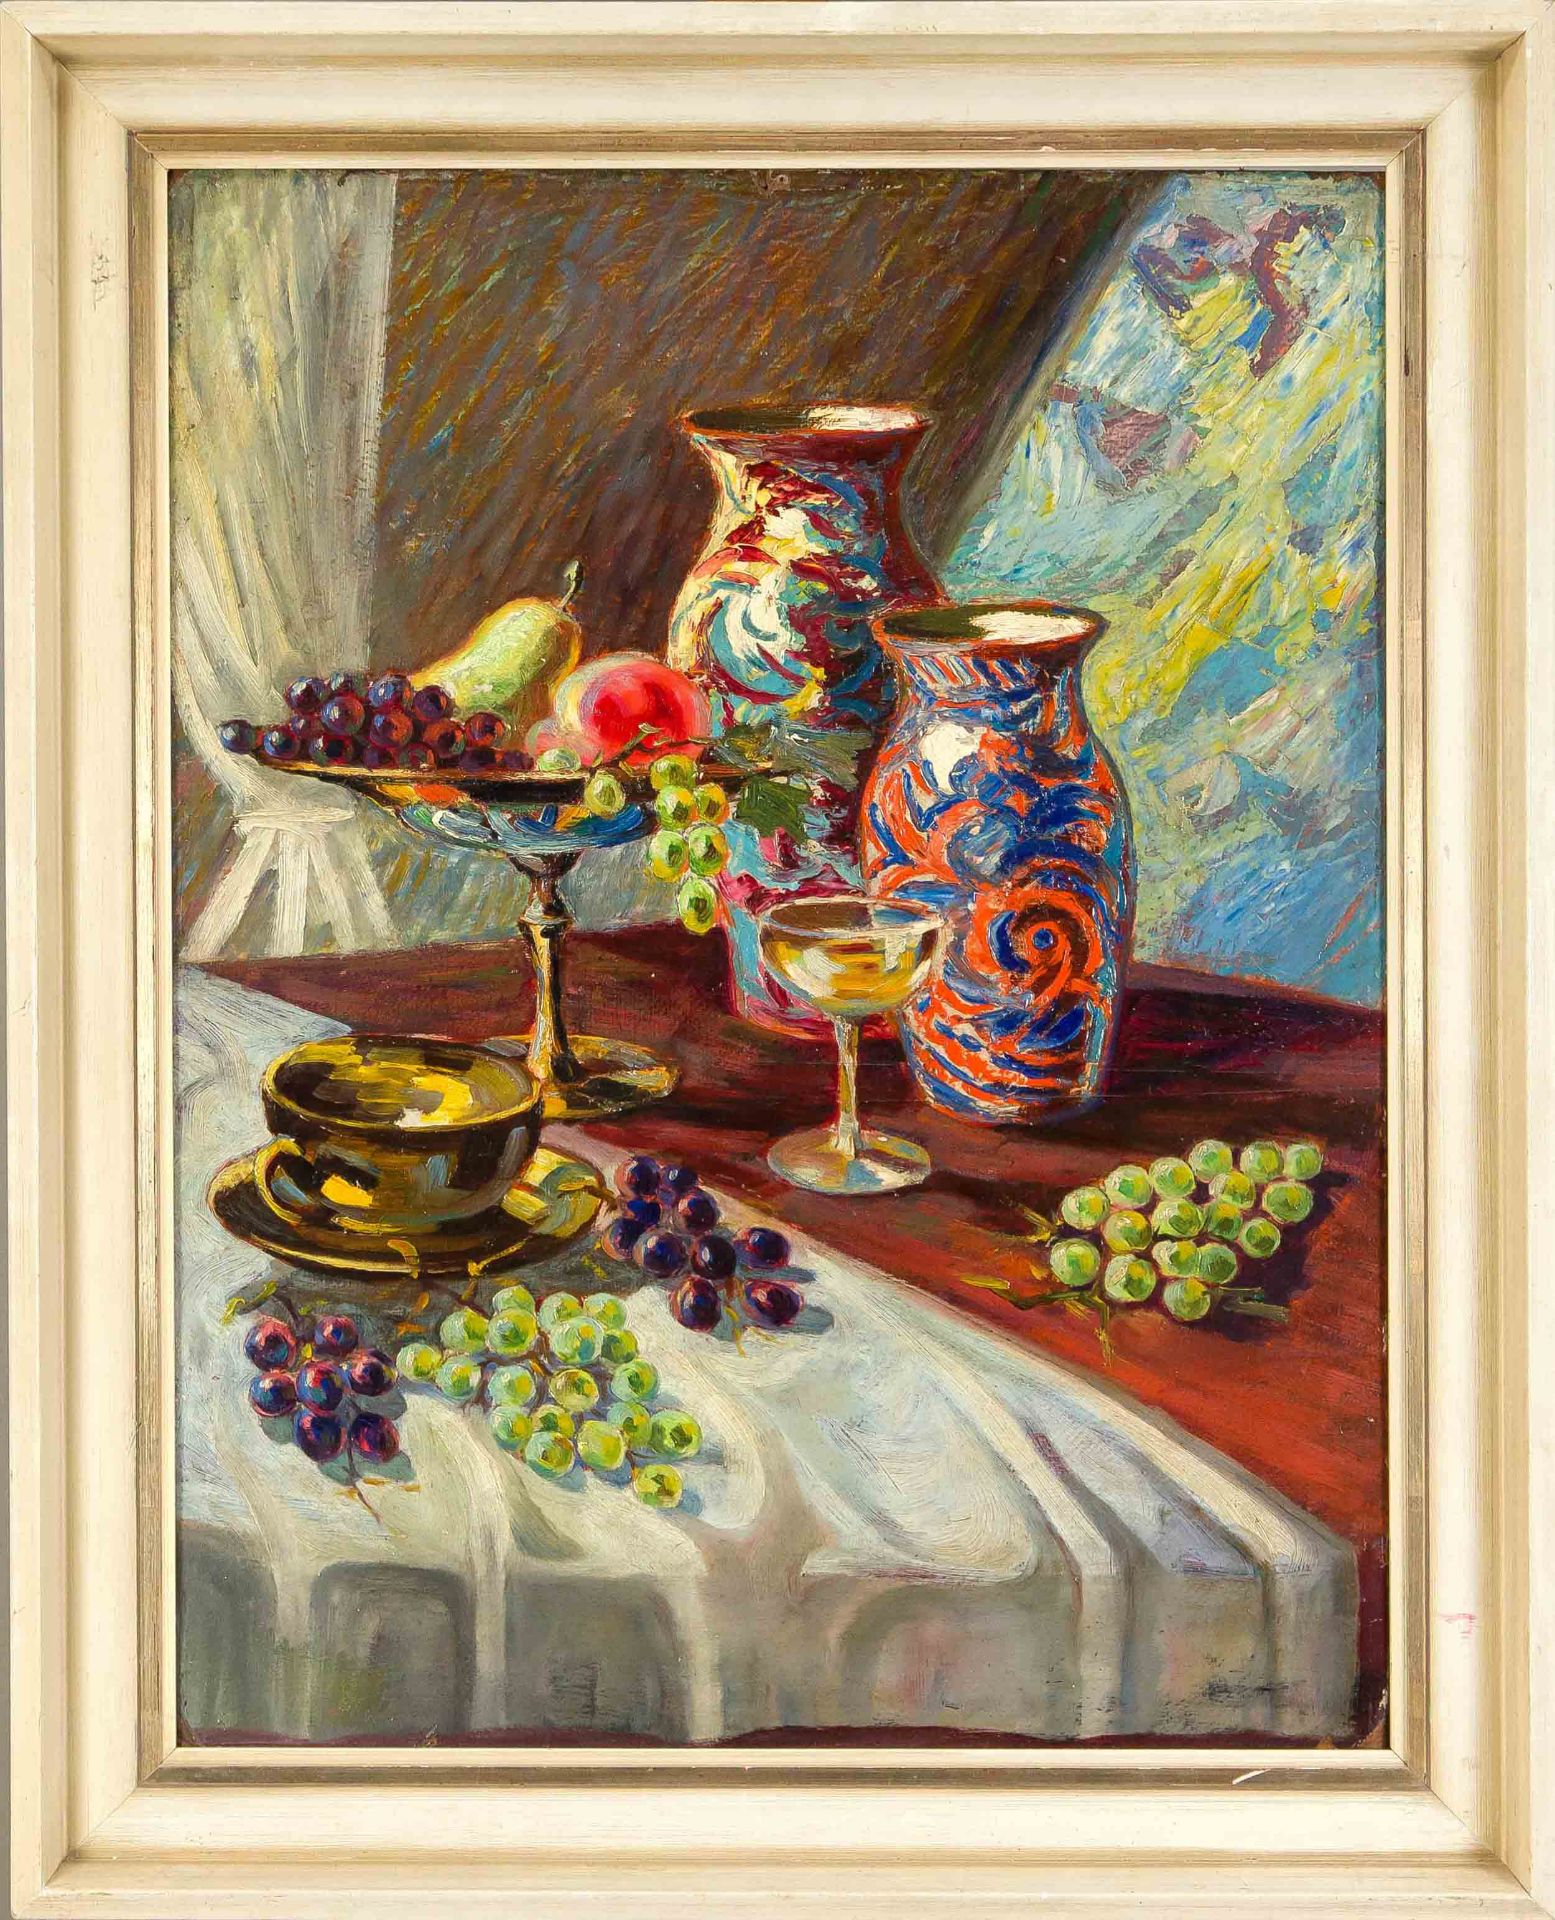 Anonymous painter c. 1930, still life with grapes and two vases, oil on cardboard, unsigned, 63 x 49